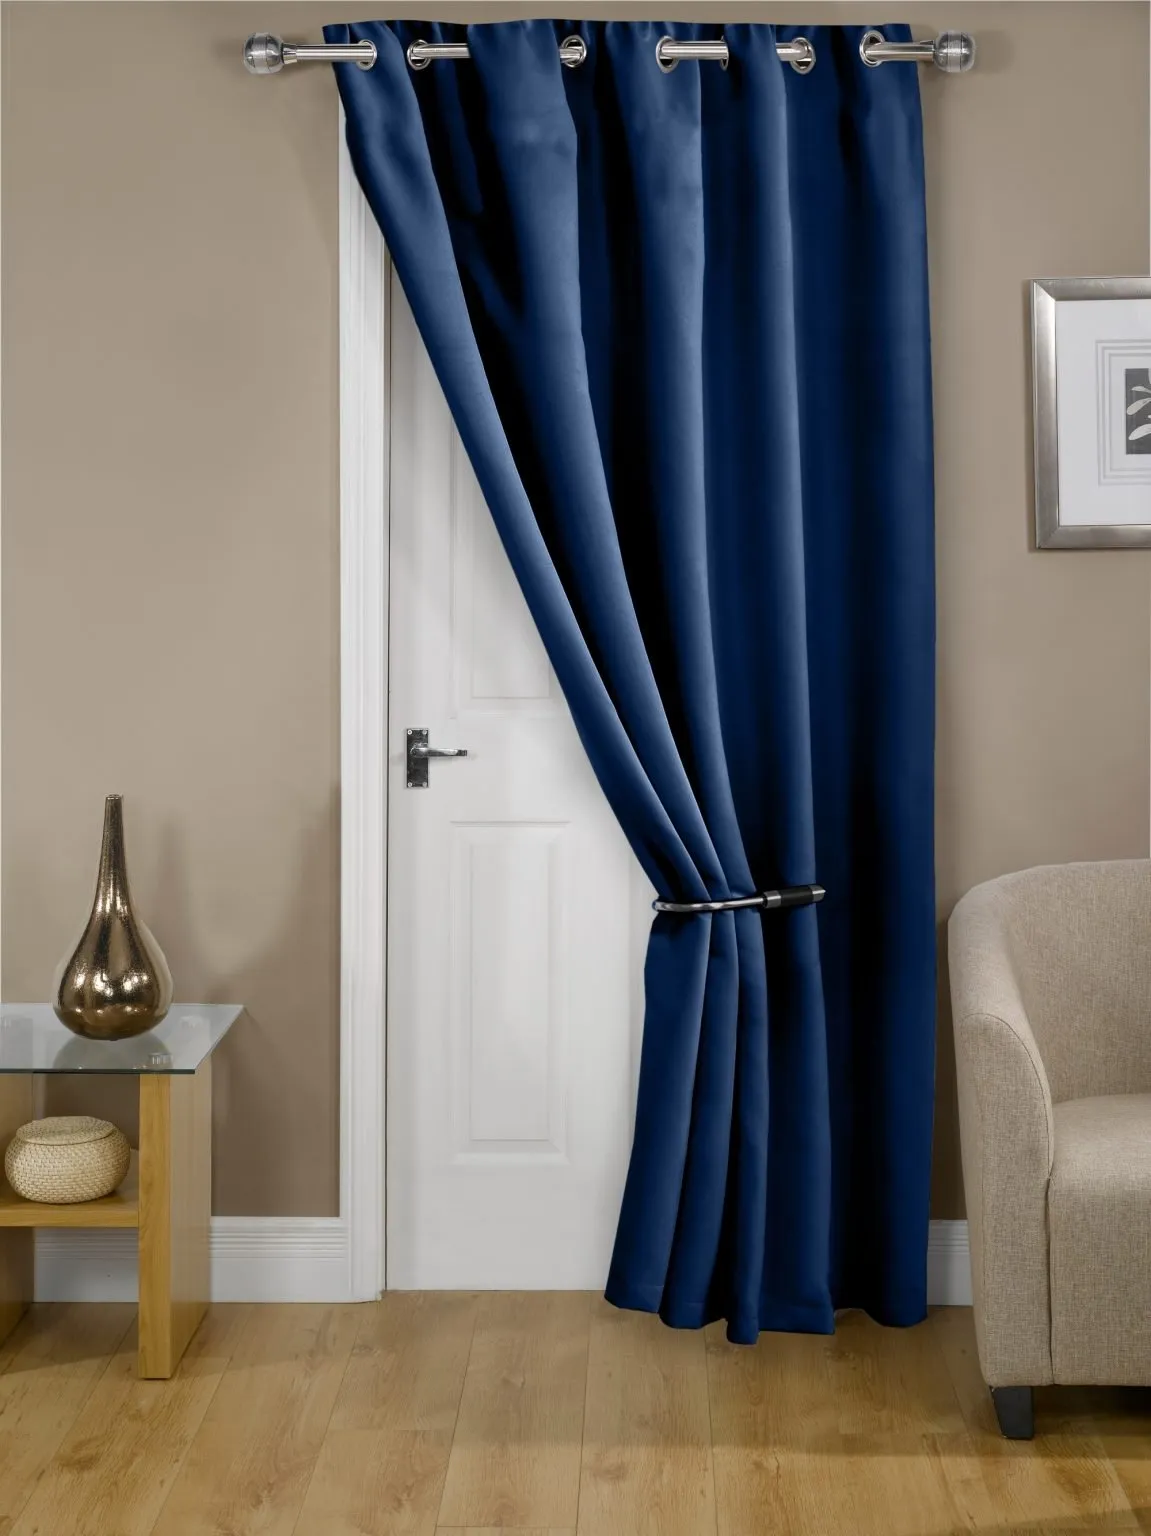 Woven Thermal Blackout Eyelet Door Curtain in Navy Blue 168x213cm